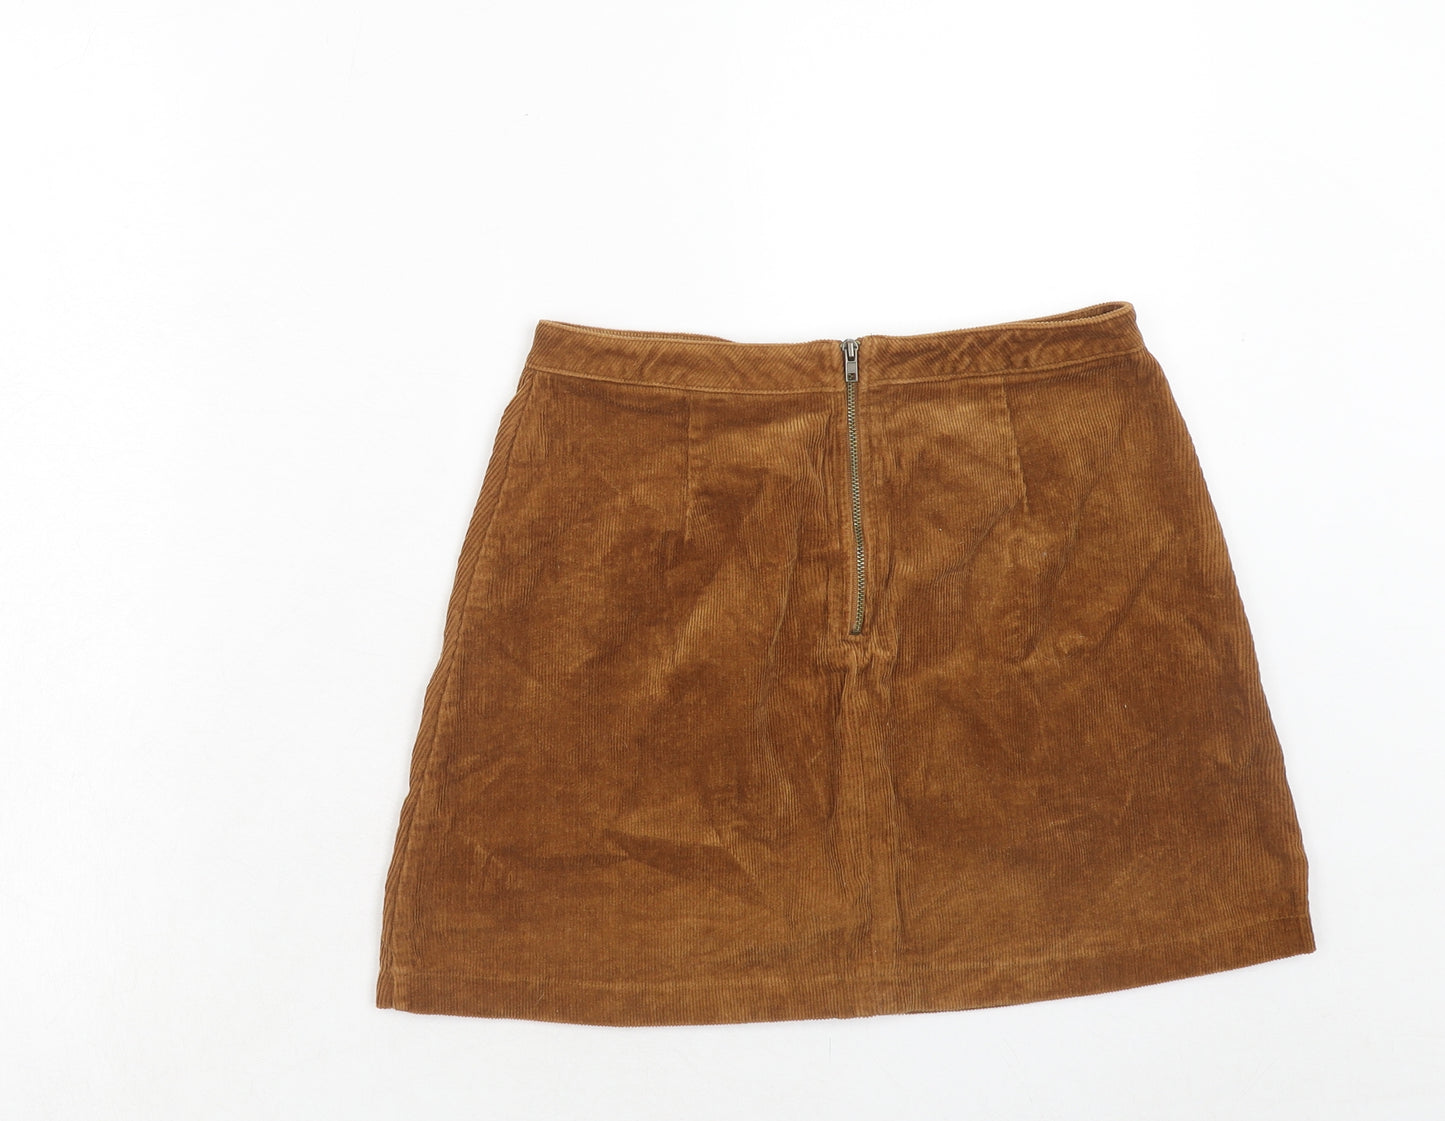 FOREVER 21 Womens Brown Cotton Mini Skirt Size M Zip